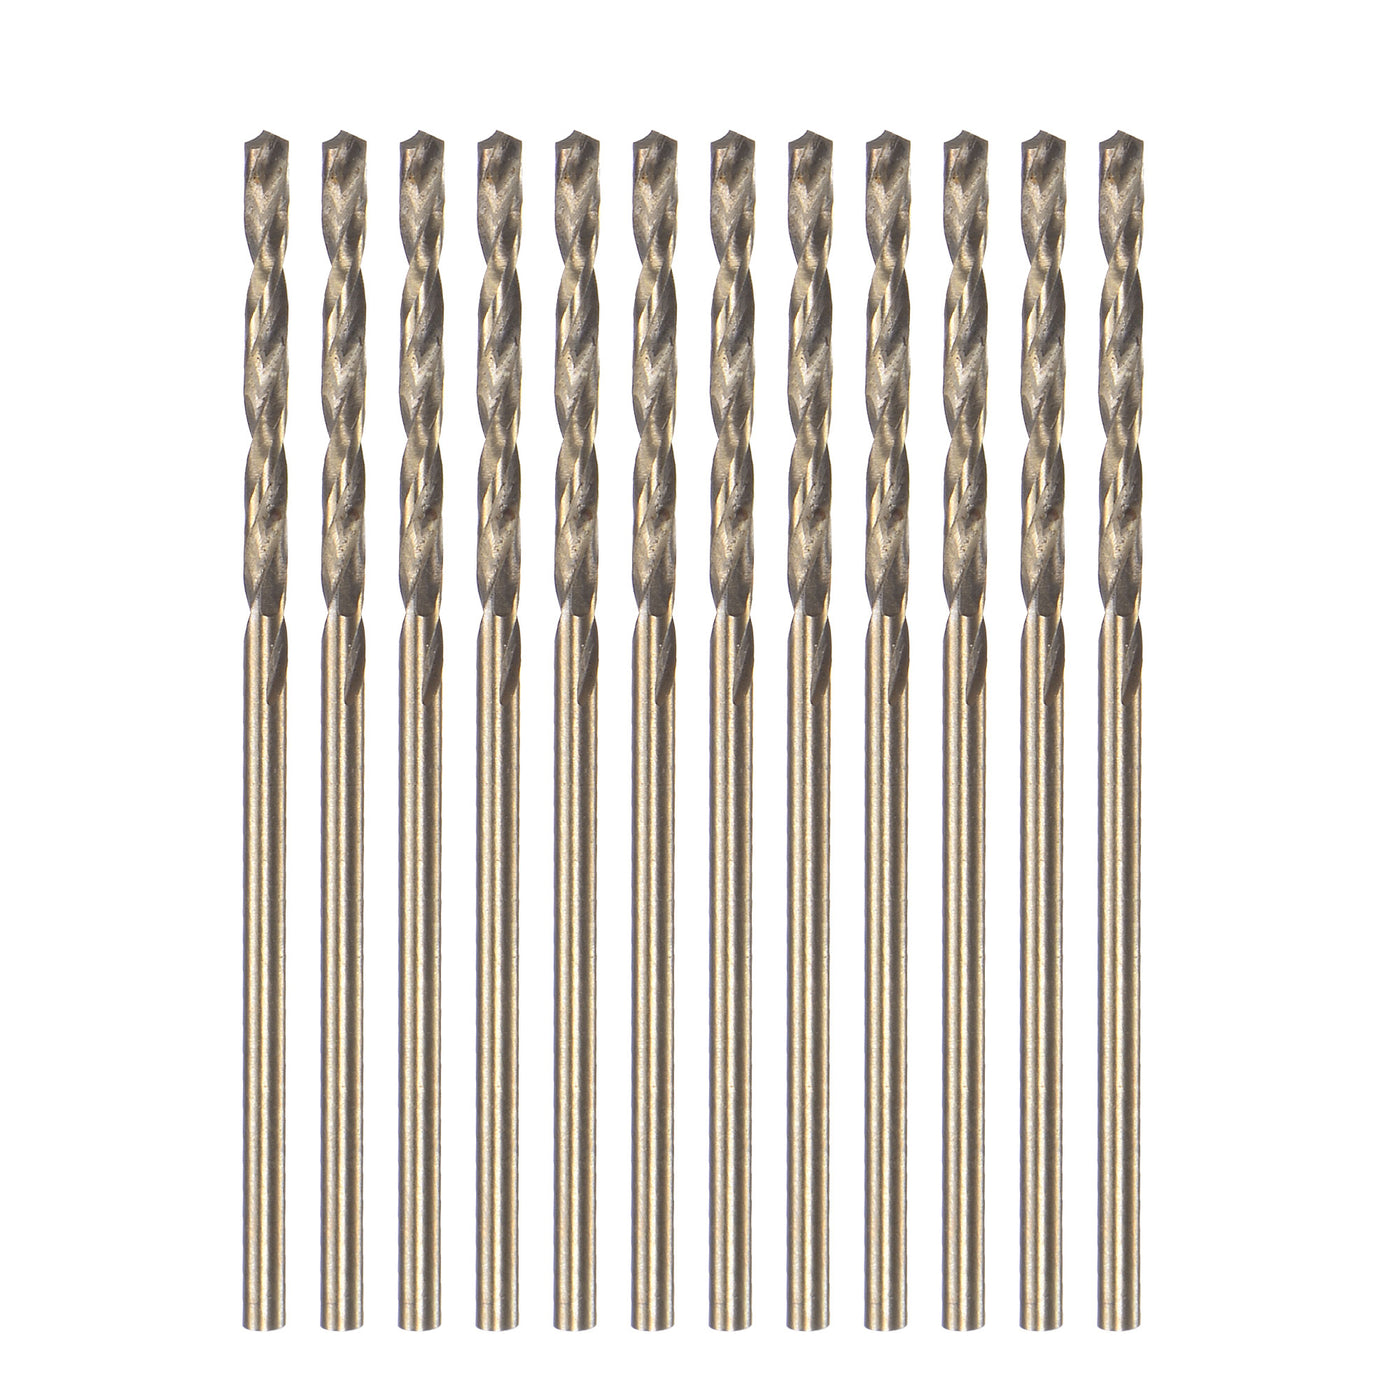 Uxcell Uxcell High Speed Steel Twist Drill Bit 1.8mm Fully Ground Titanium Coated 12 Pcs